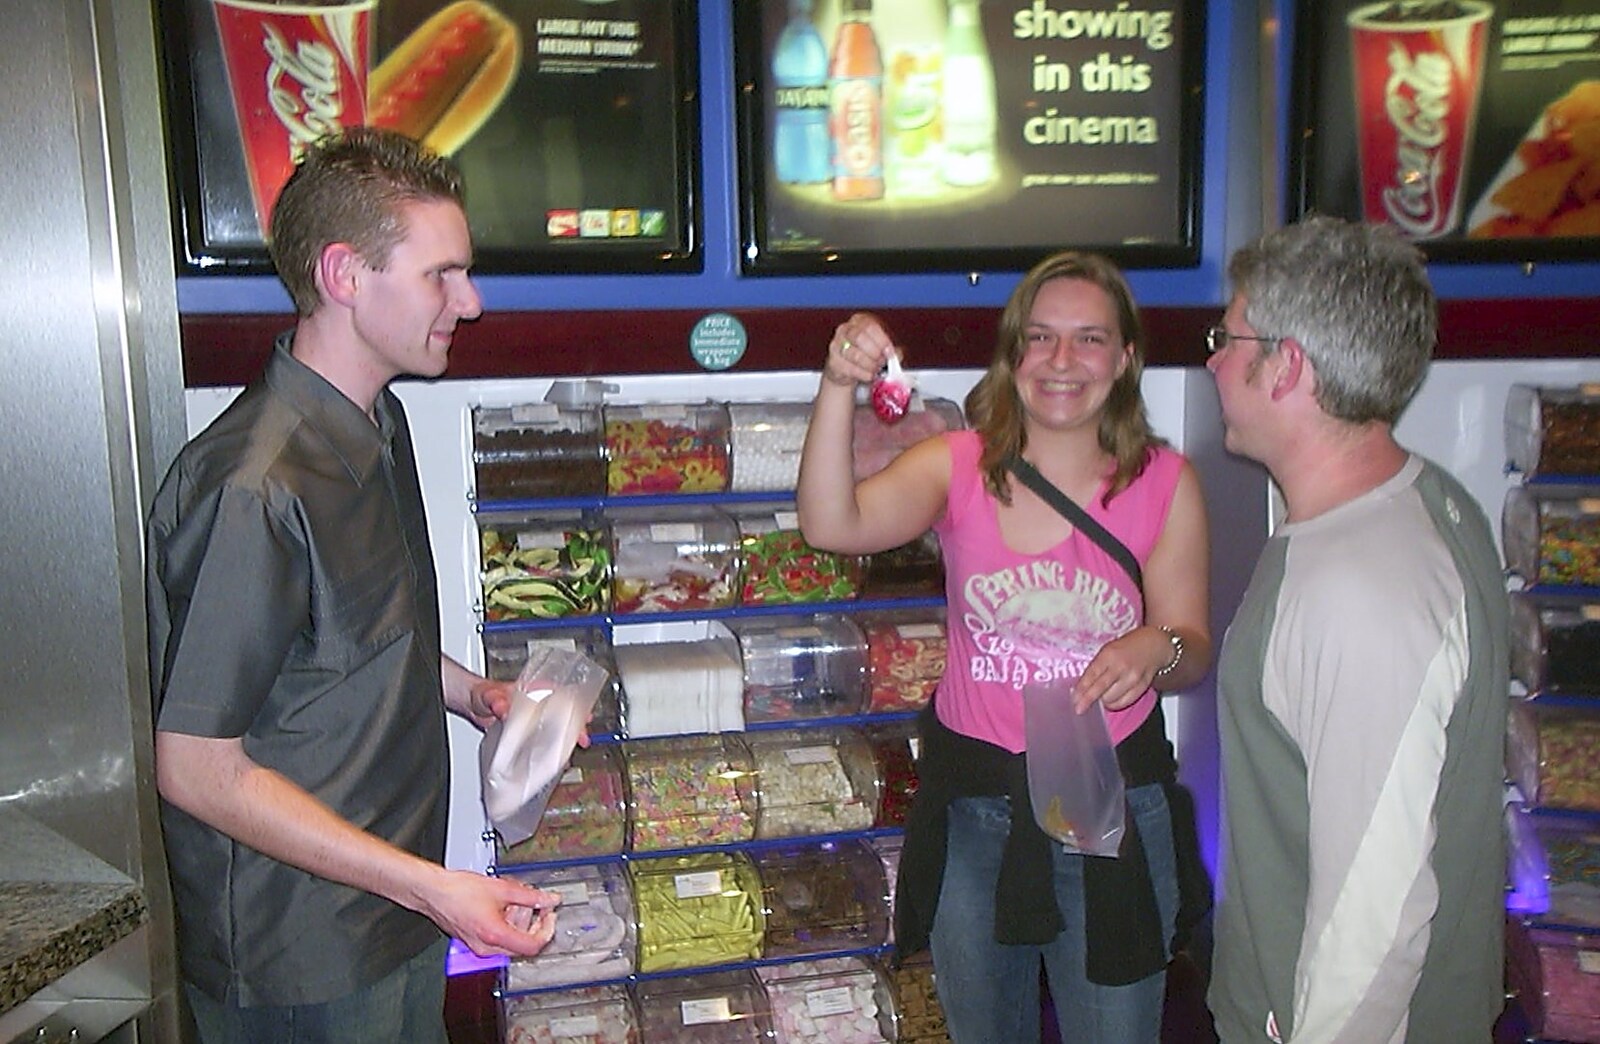 At the cinema, Jess chooses some sweets from Mother and Mike Visit, Aldringham, Suffolk - 26th May 2004